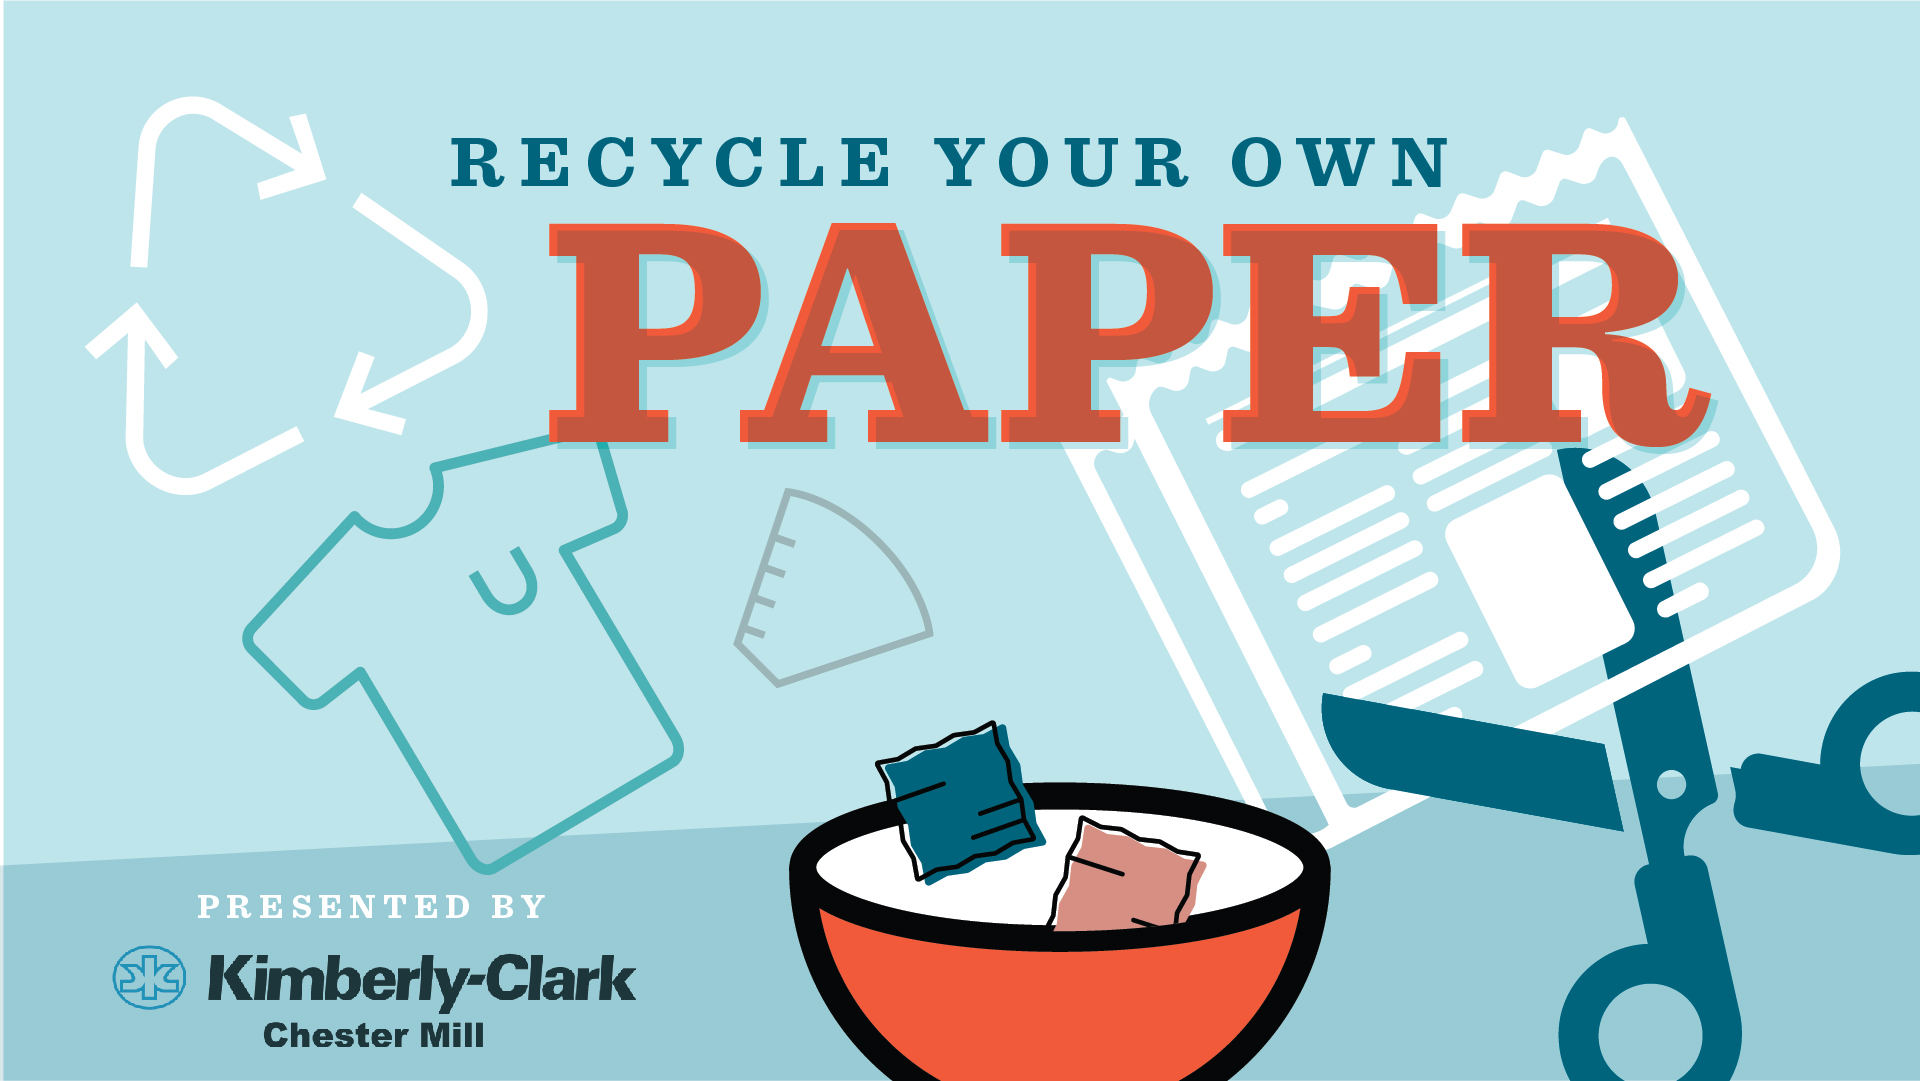 Make Your Own Recycled Paper!